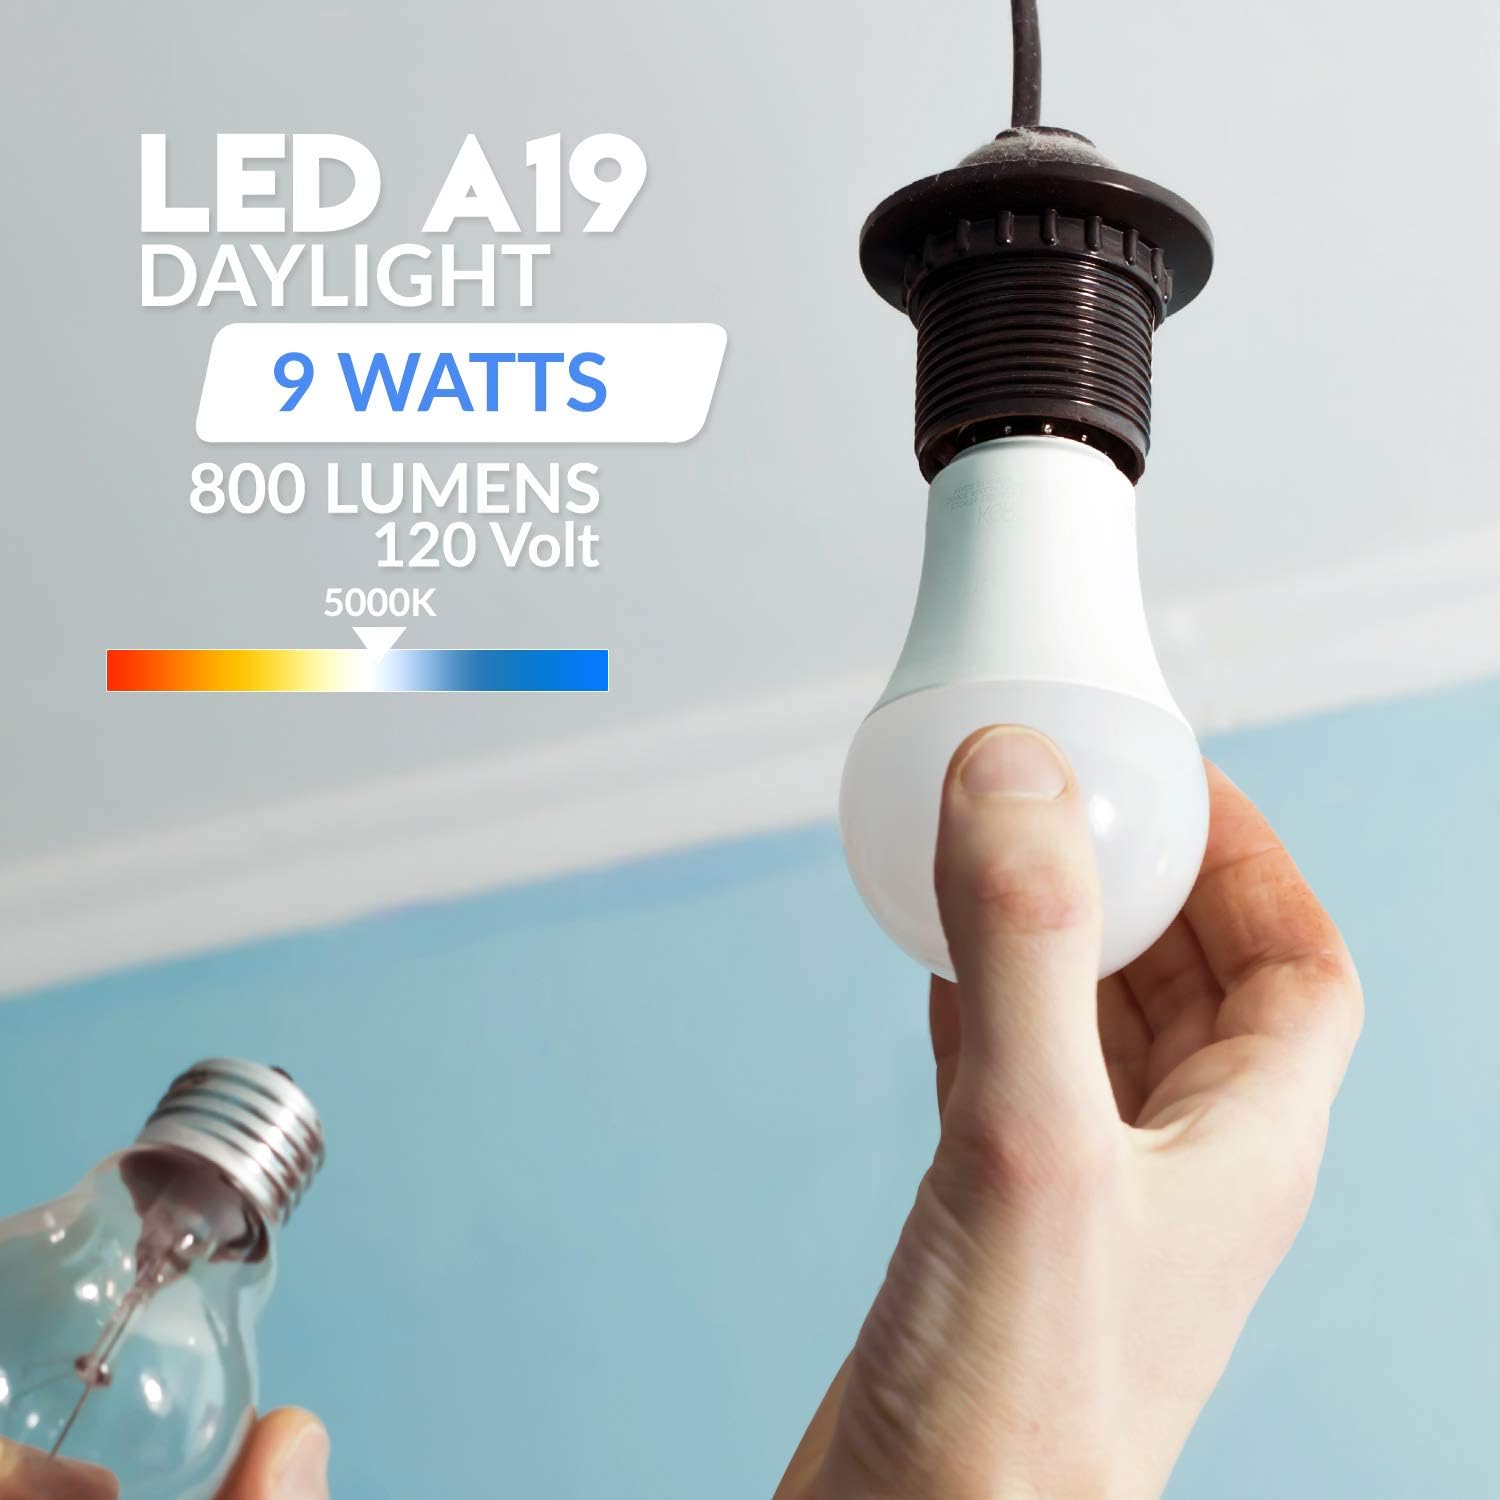 6 PACK 9W LED A19 Light Bulb 60W Equivalent 5000K Bright White – Daylight 750 Lumens, Non-Dimmable